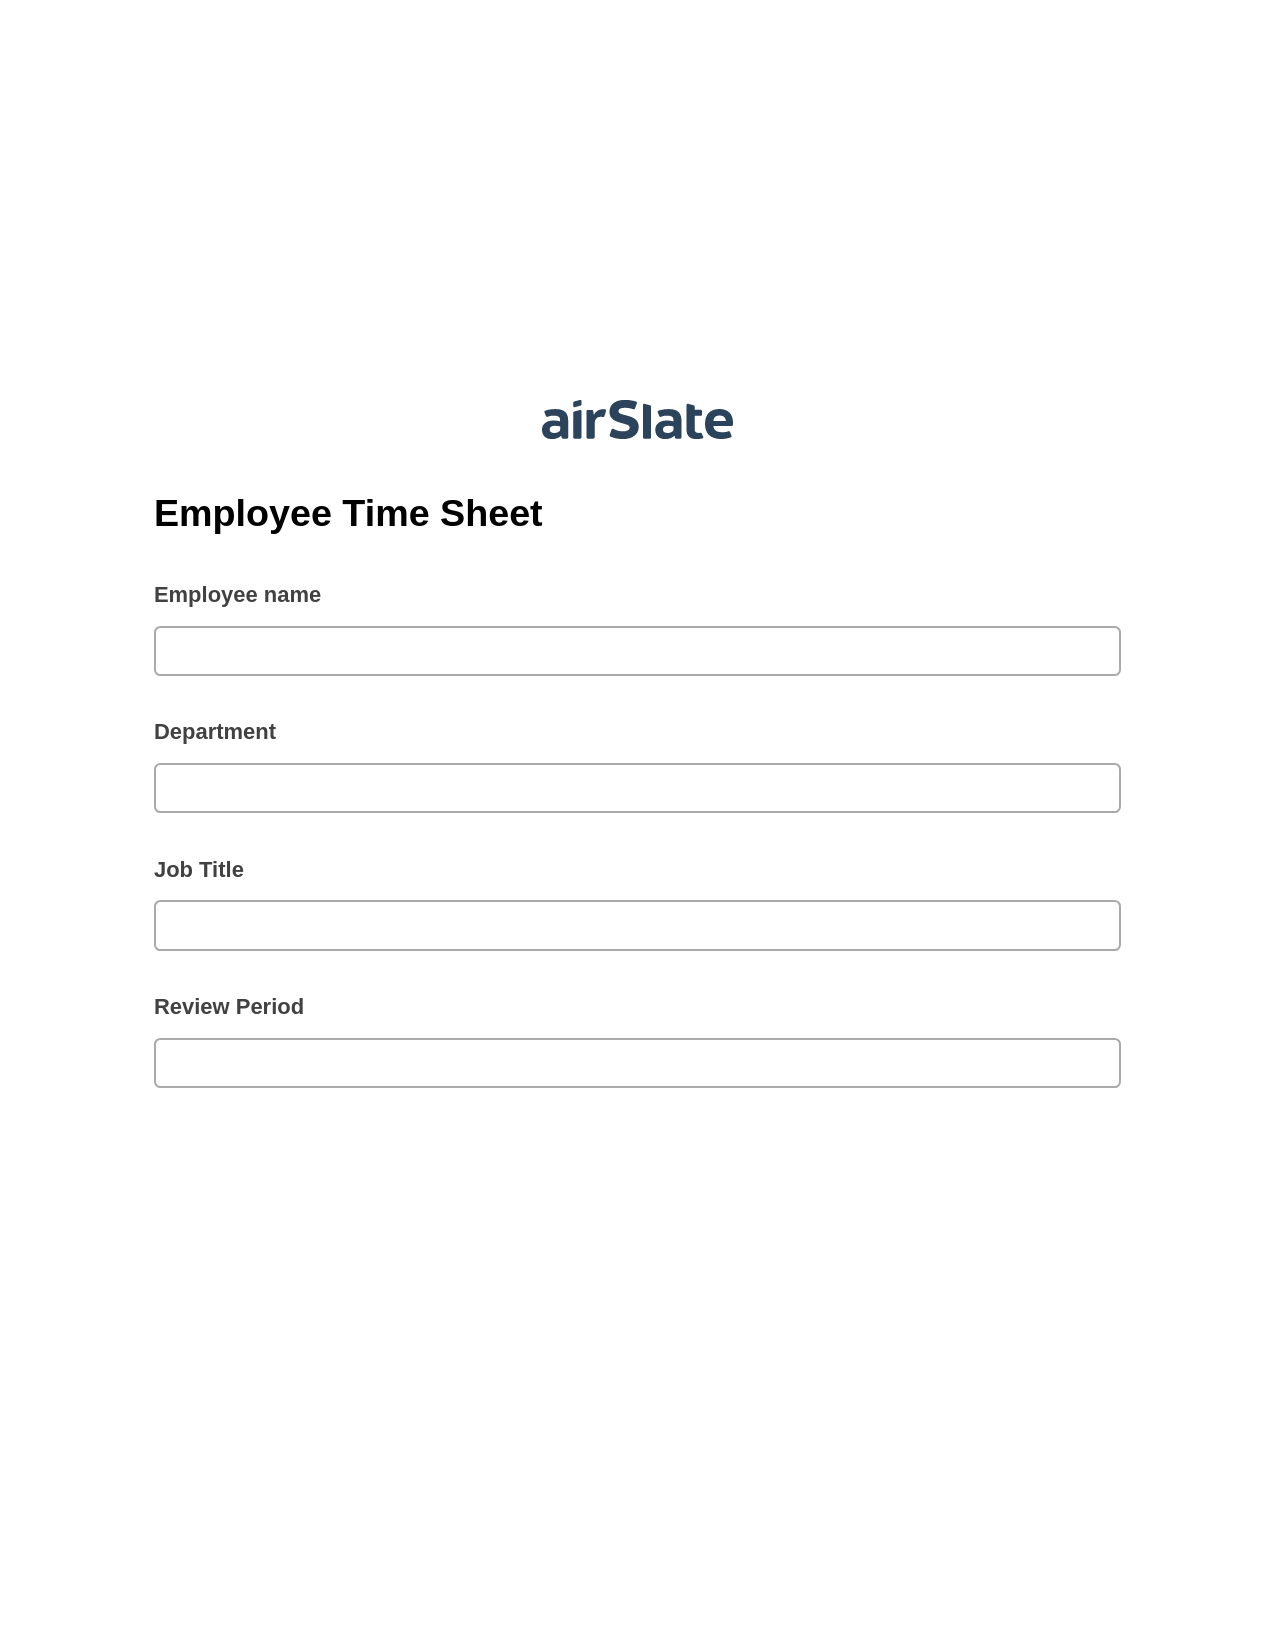 Multirole Employee Time Sheet Pre-fill from Salesforce Records Bot, Webhook Bot, Archive to Google Drive Bot